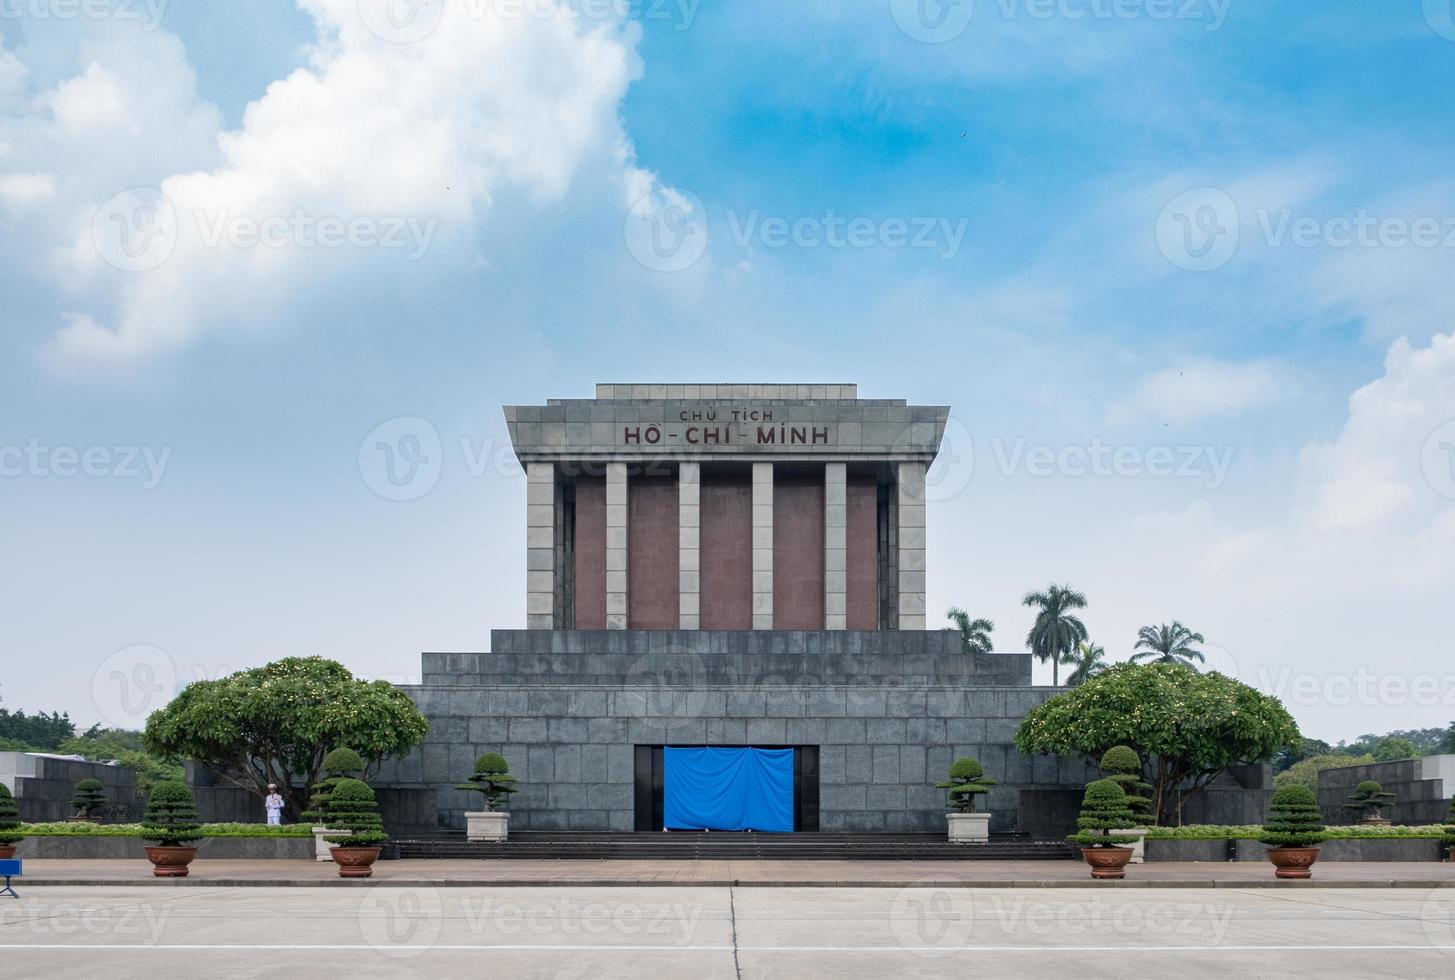 Architecture building Ho Chi Minh Mausoleum place of revolutionary leader in center of Ba Dinh Square photo